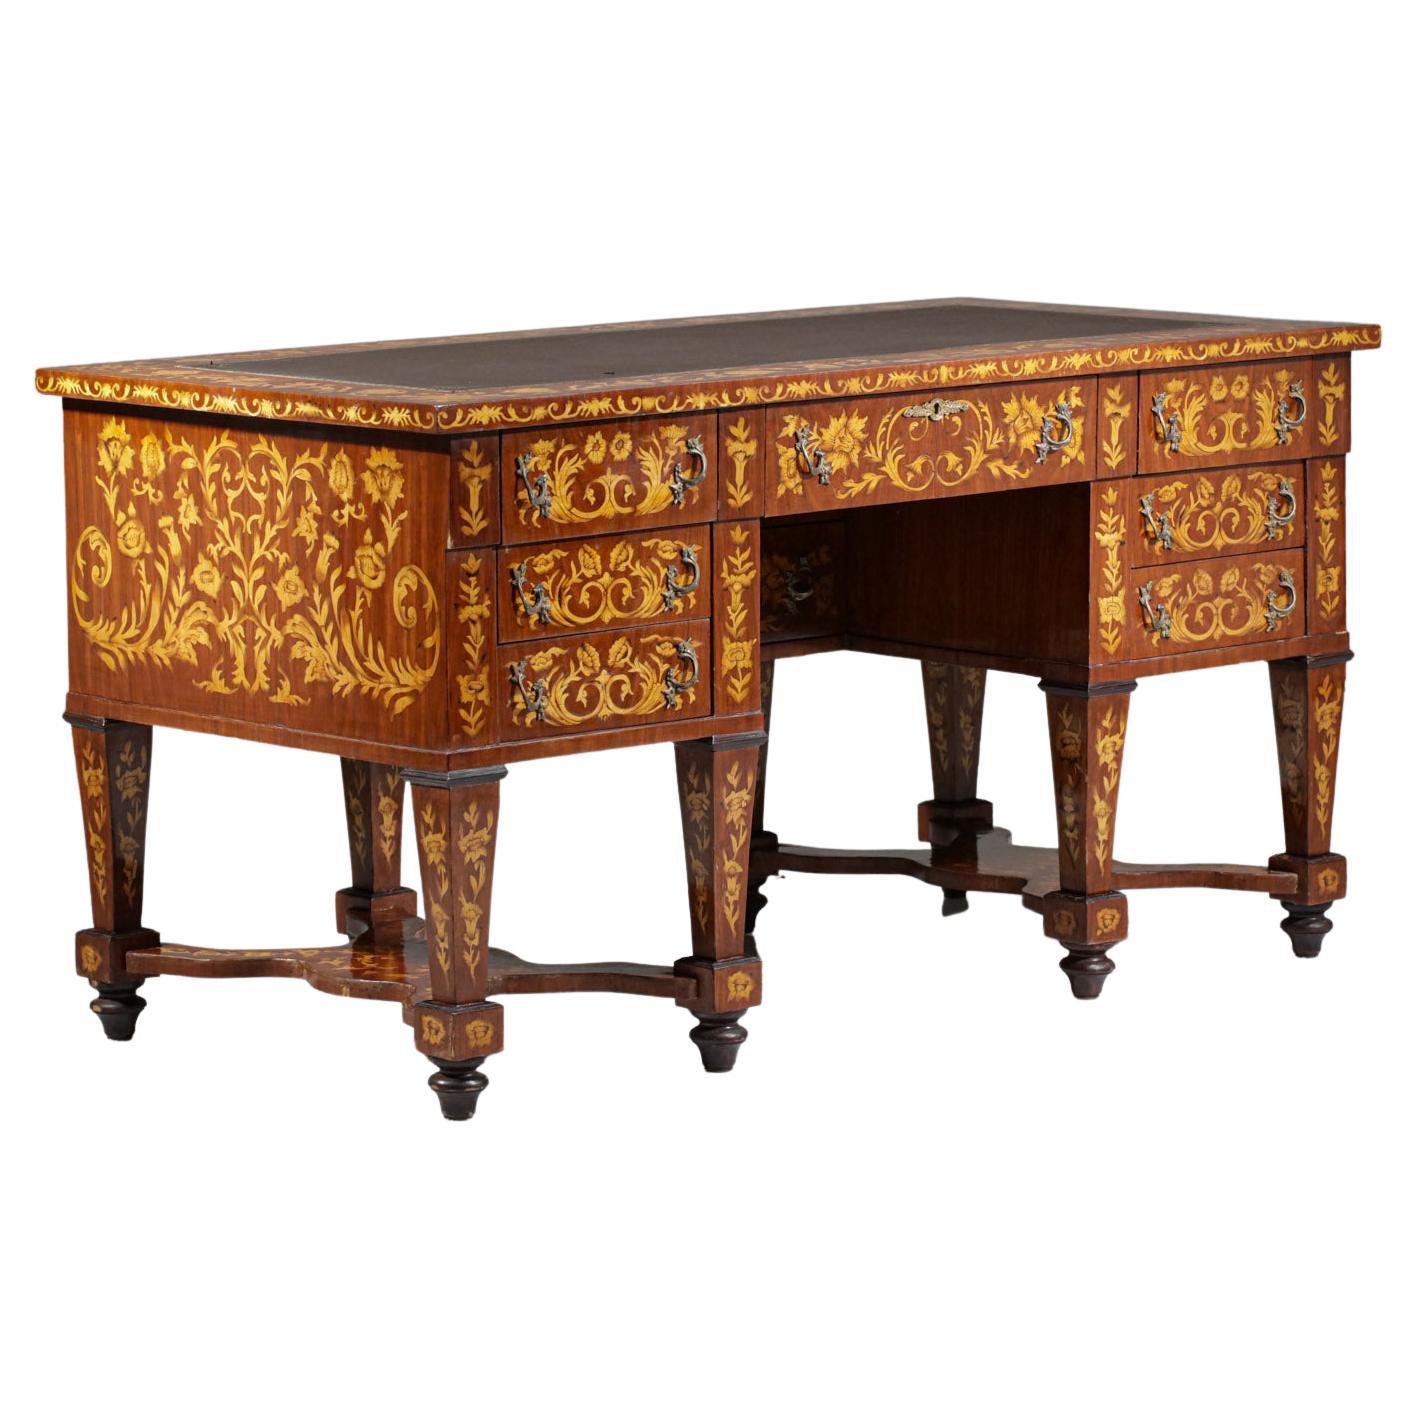 Mazarin Style Desk in Solid Wood and Floral Marquetry, F419